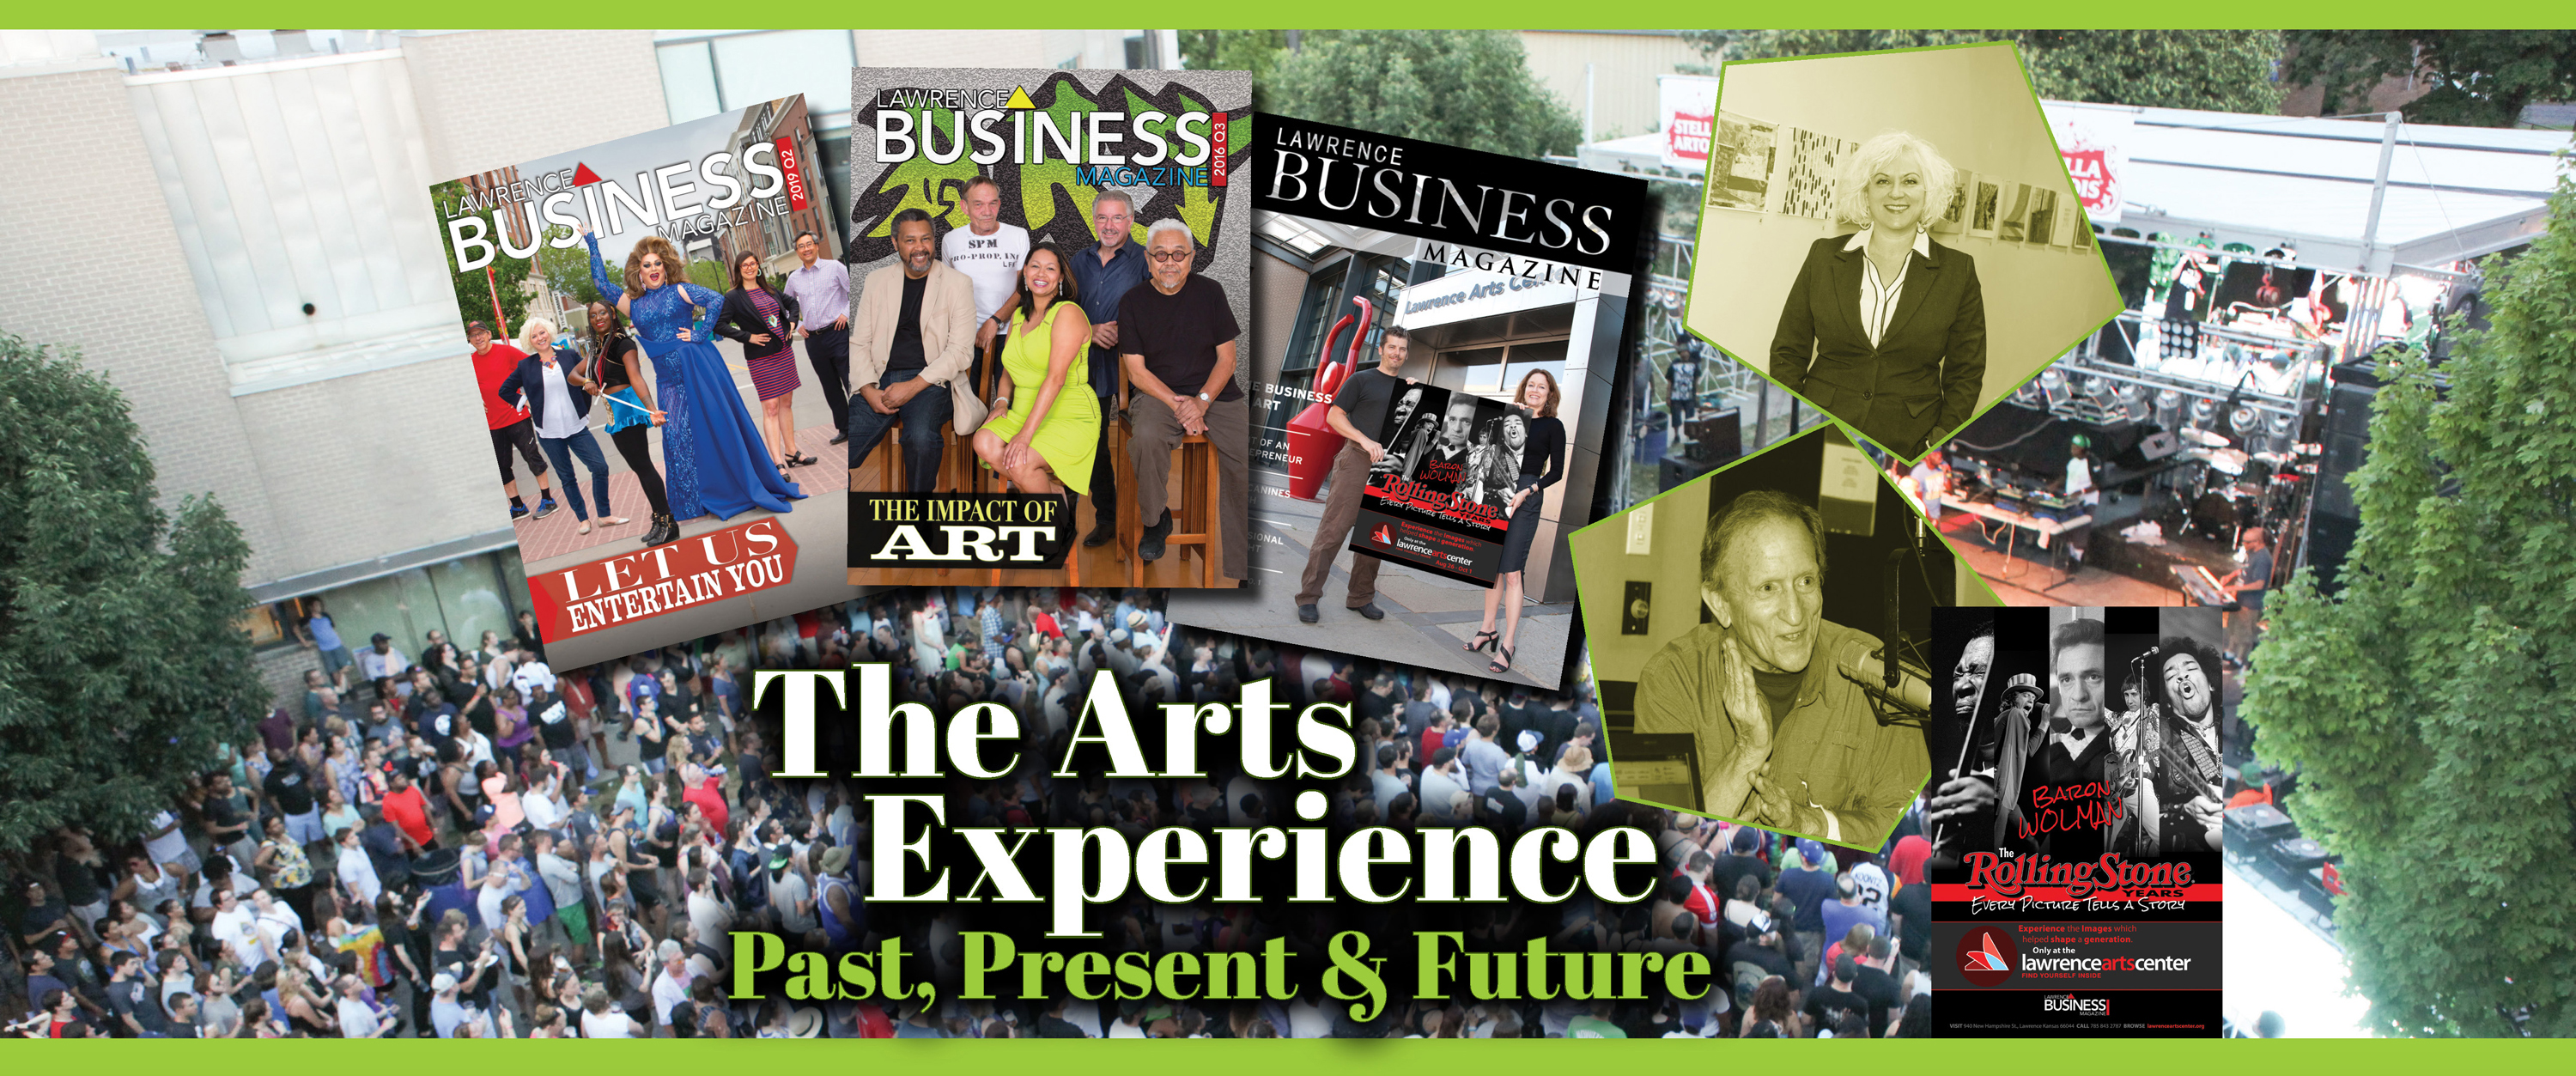  The Arts an Experience in the Past, Present and for the Future 